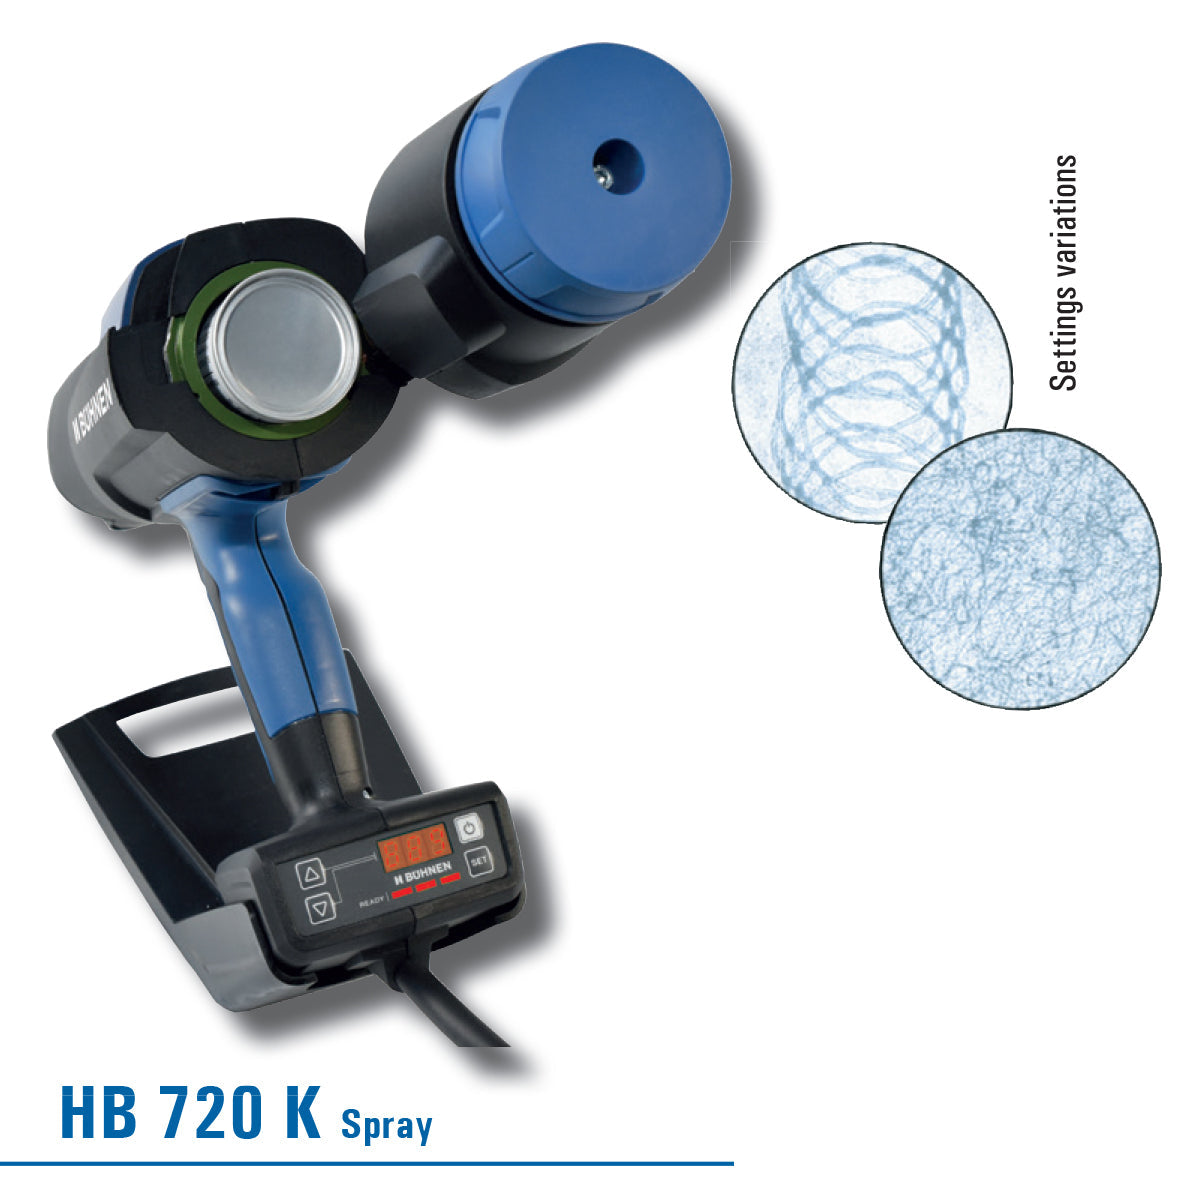 HB 720 K Pneumatic Cartridge Spray incl. tool stand and air service unit